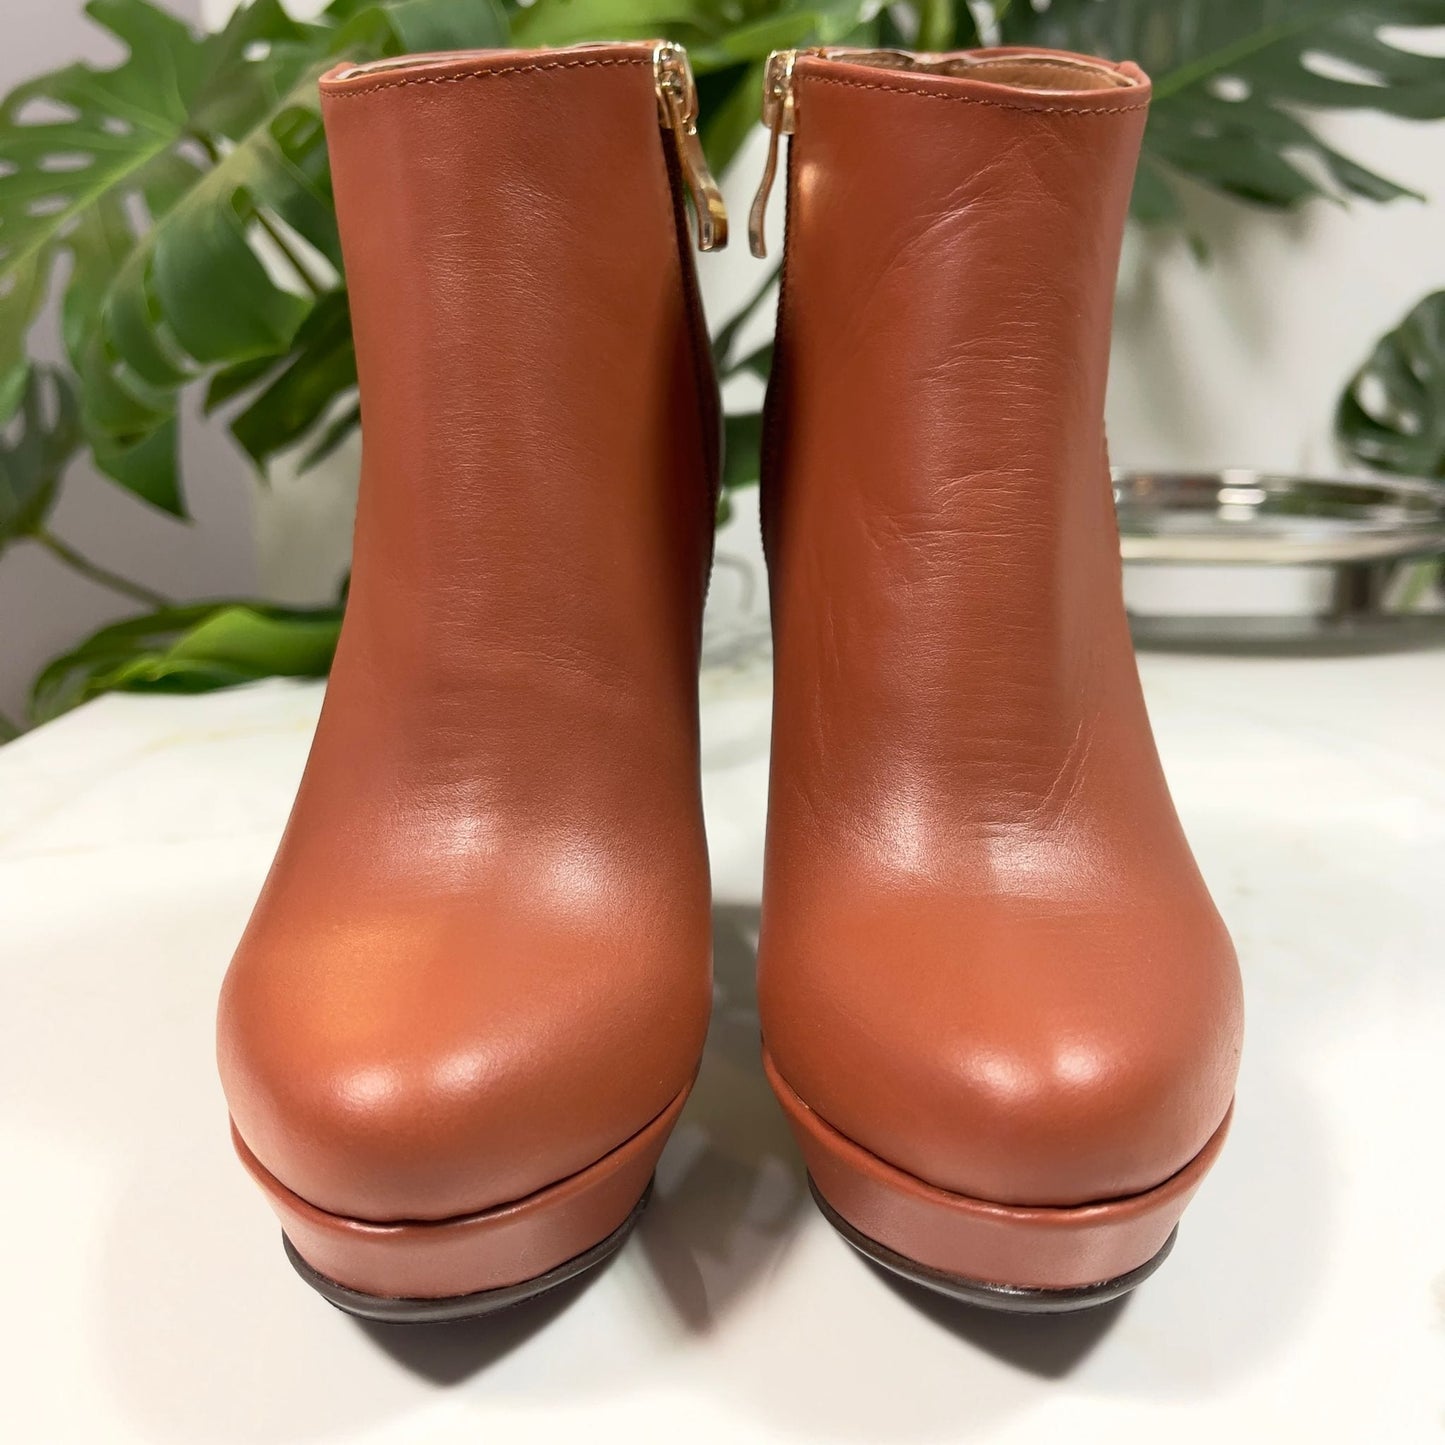 Brown leather ankle boots set on a platform